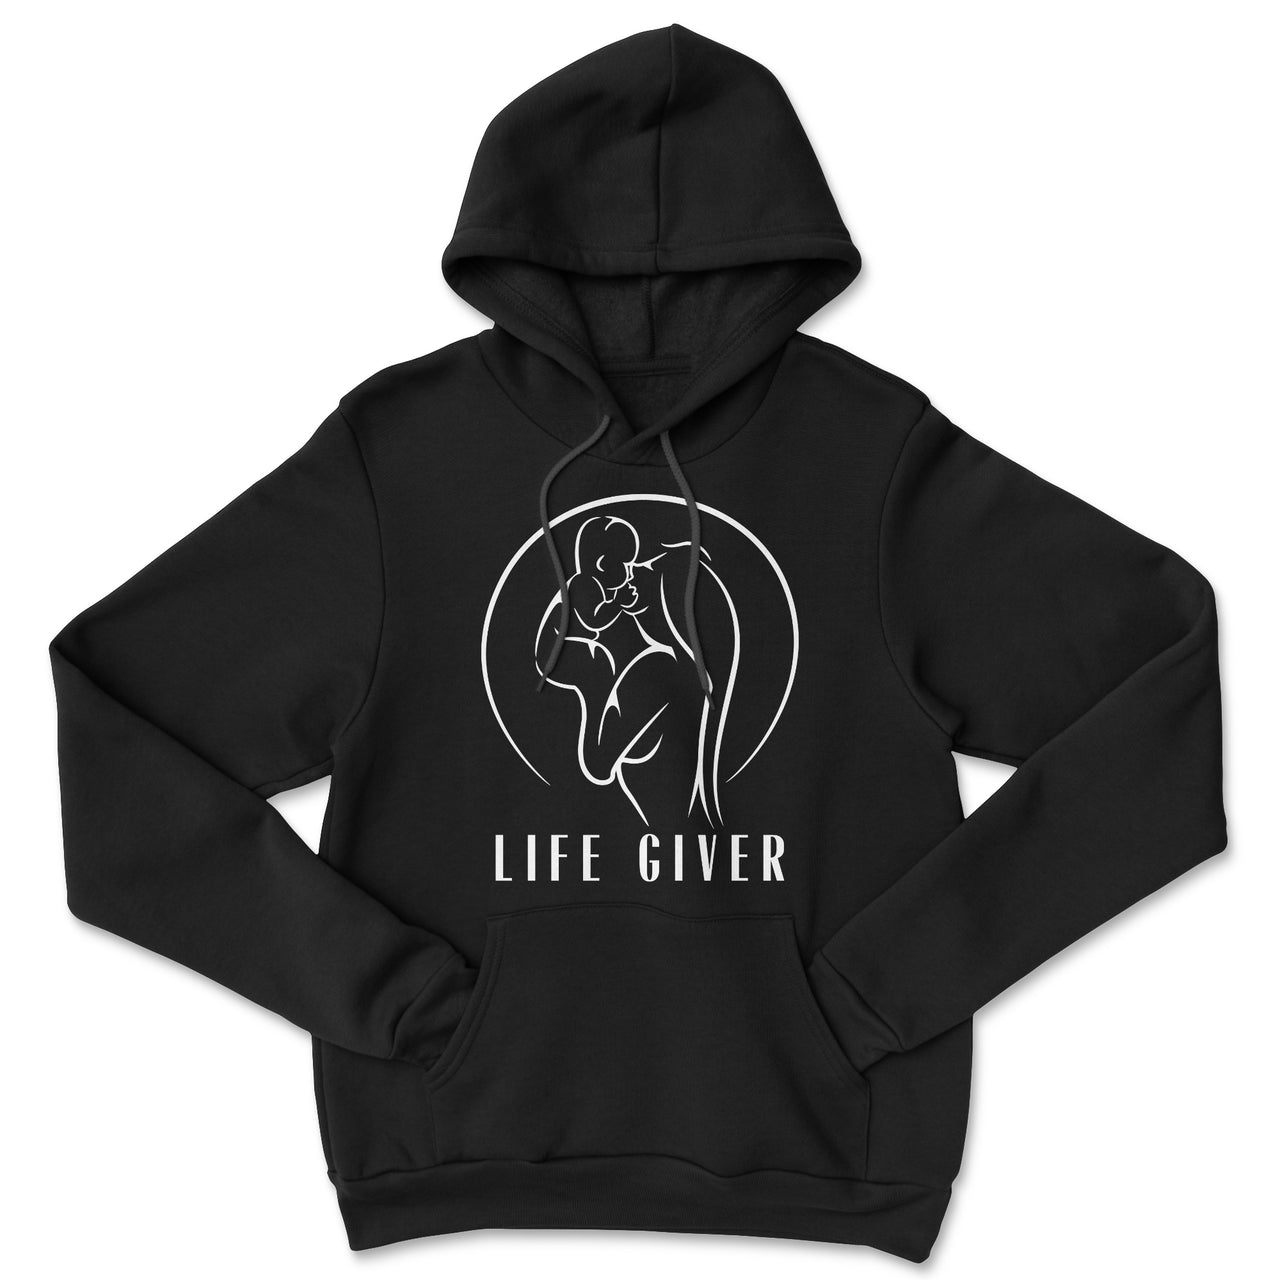 Life Giver Hoodie